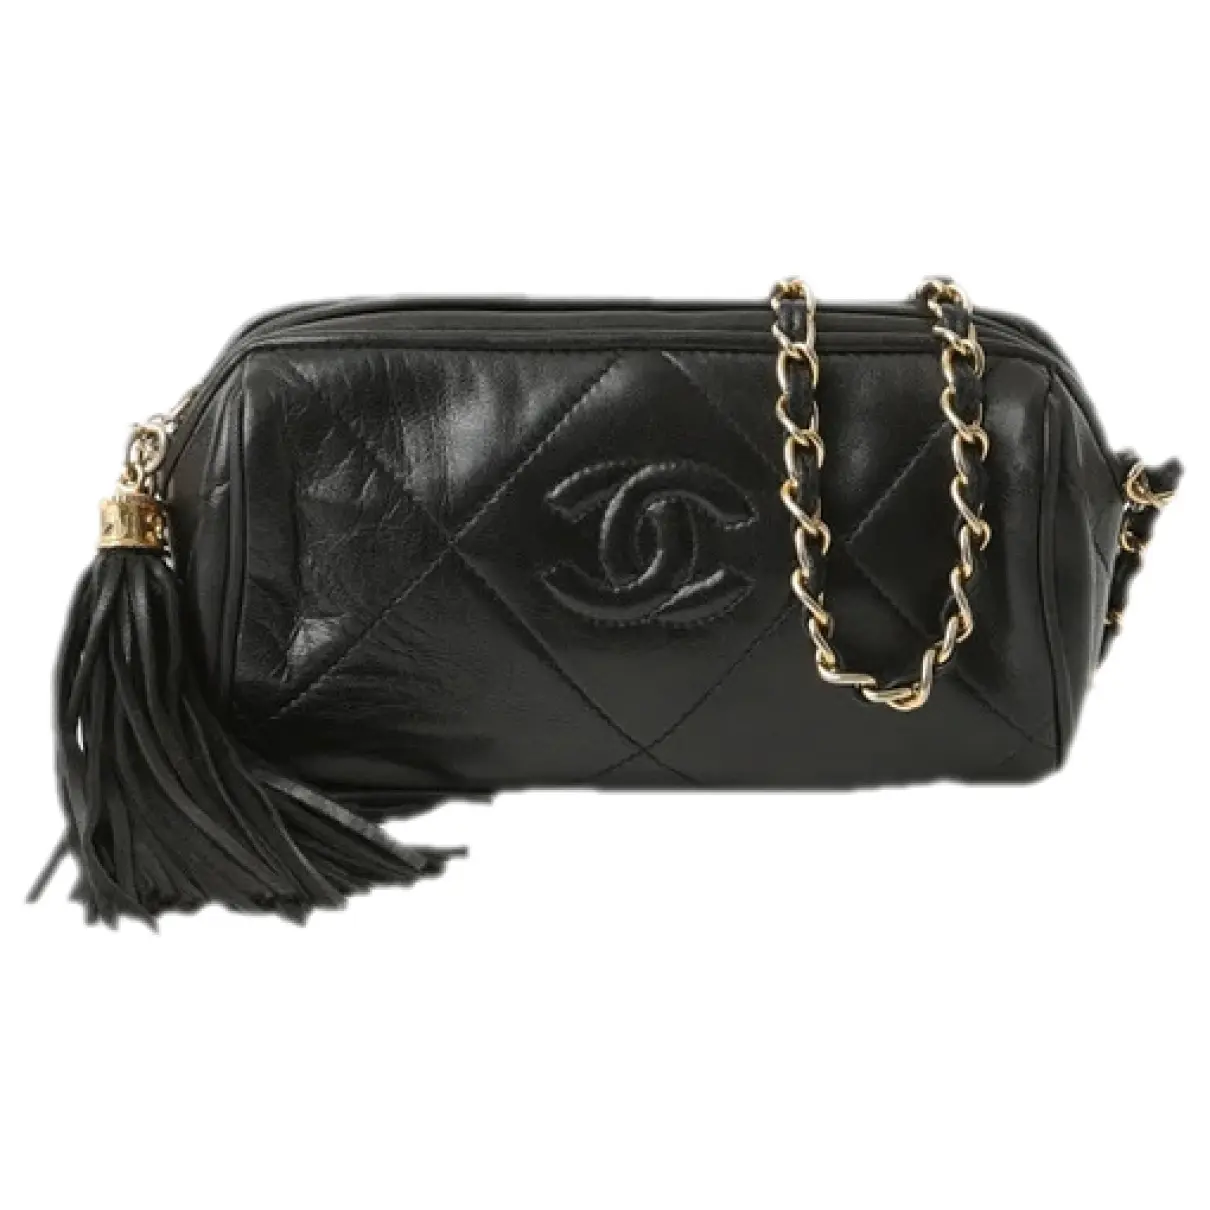 Trendy CC Quilted leather handbag